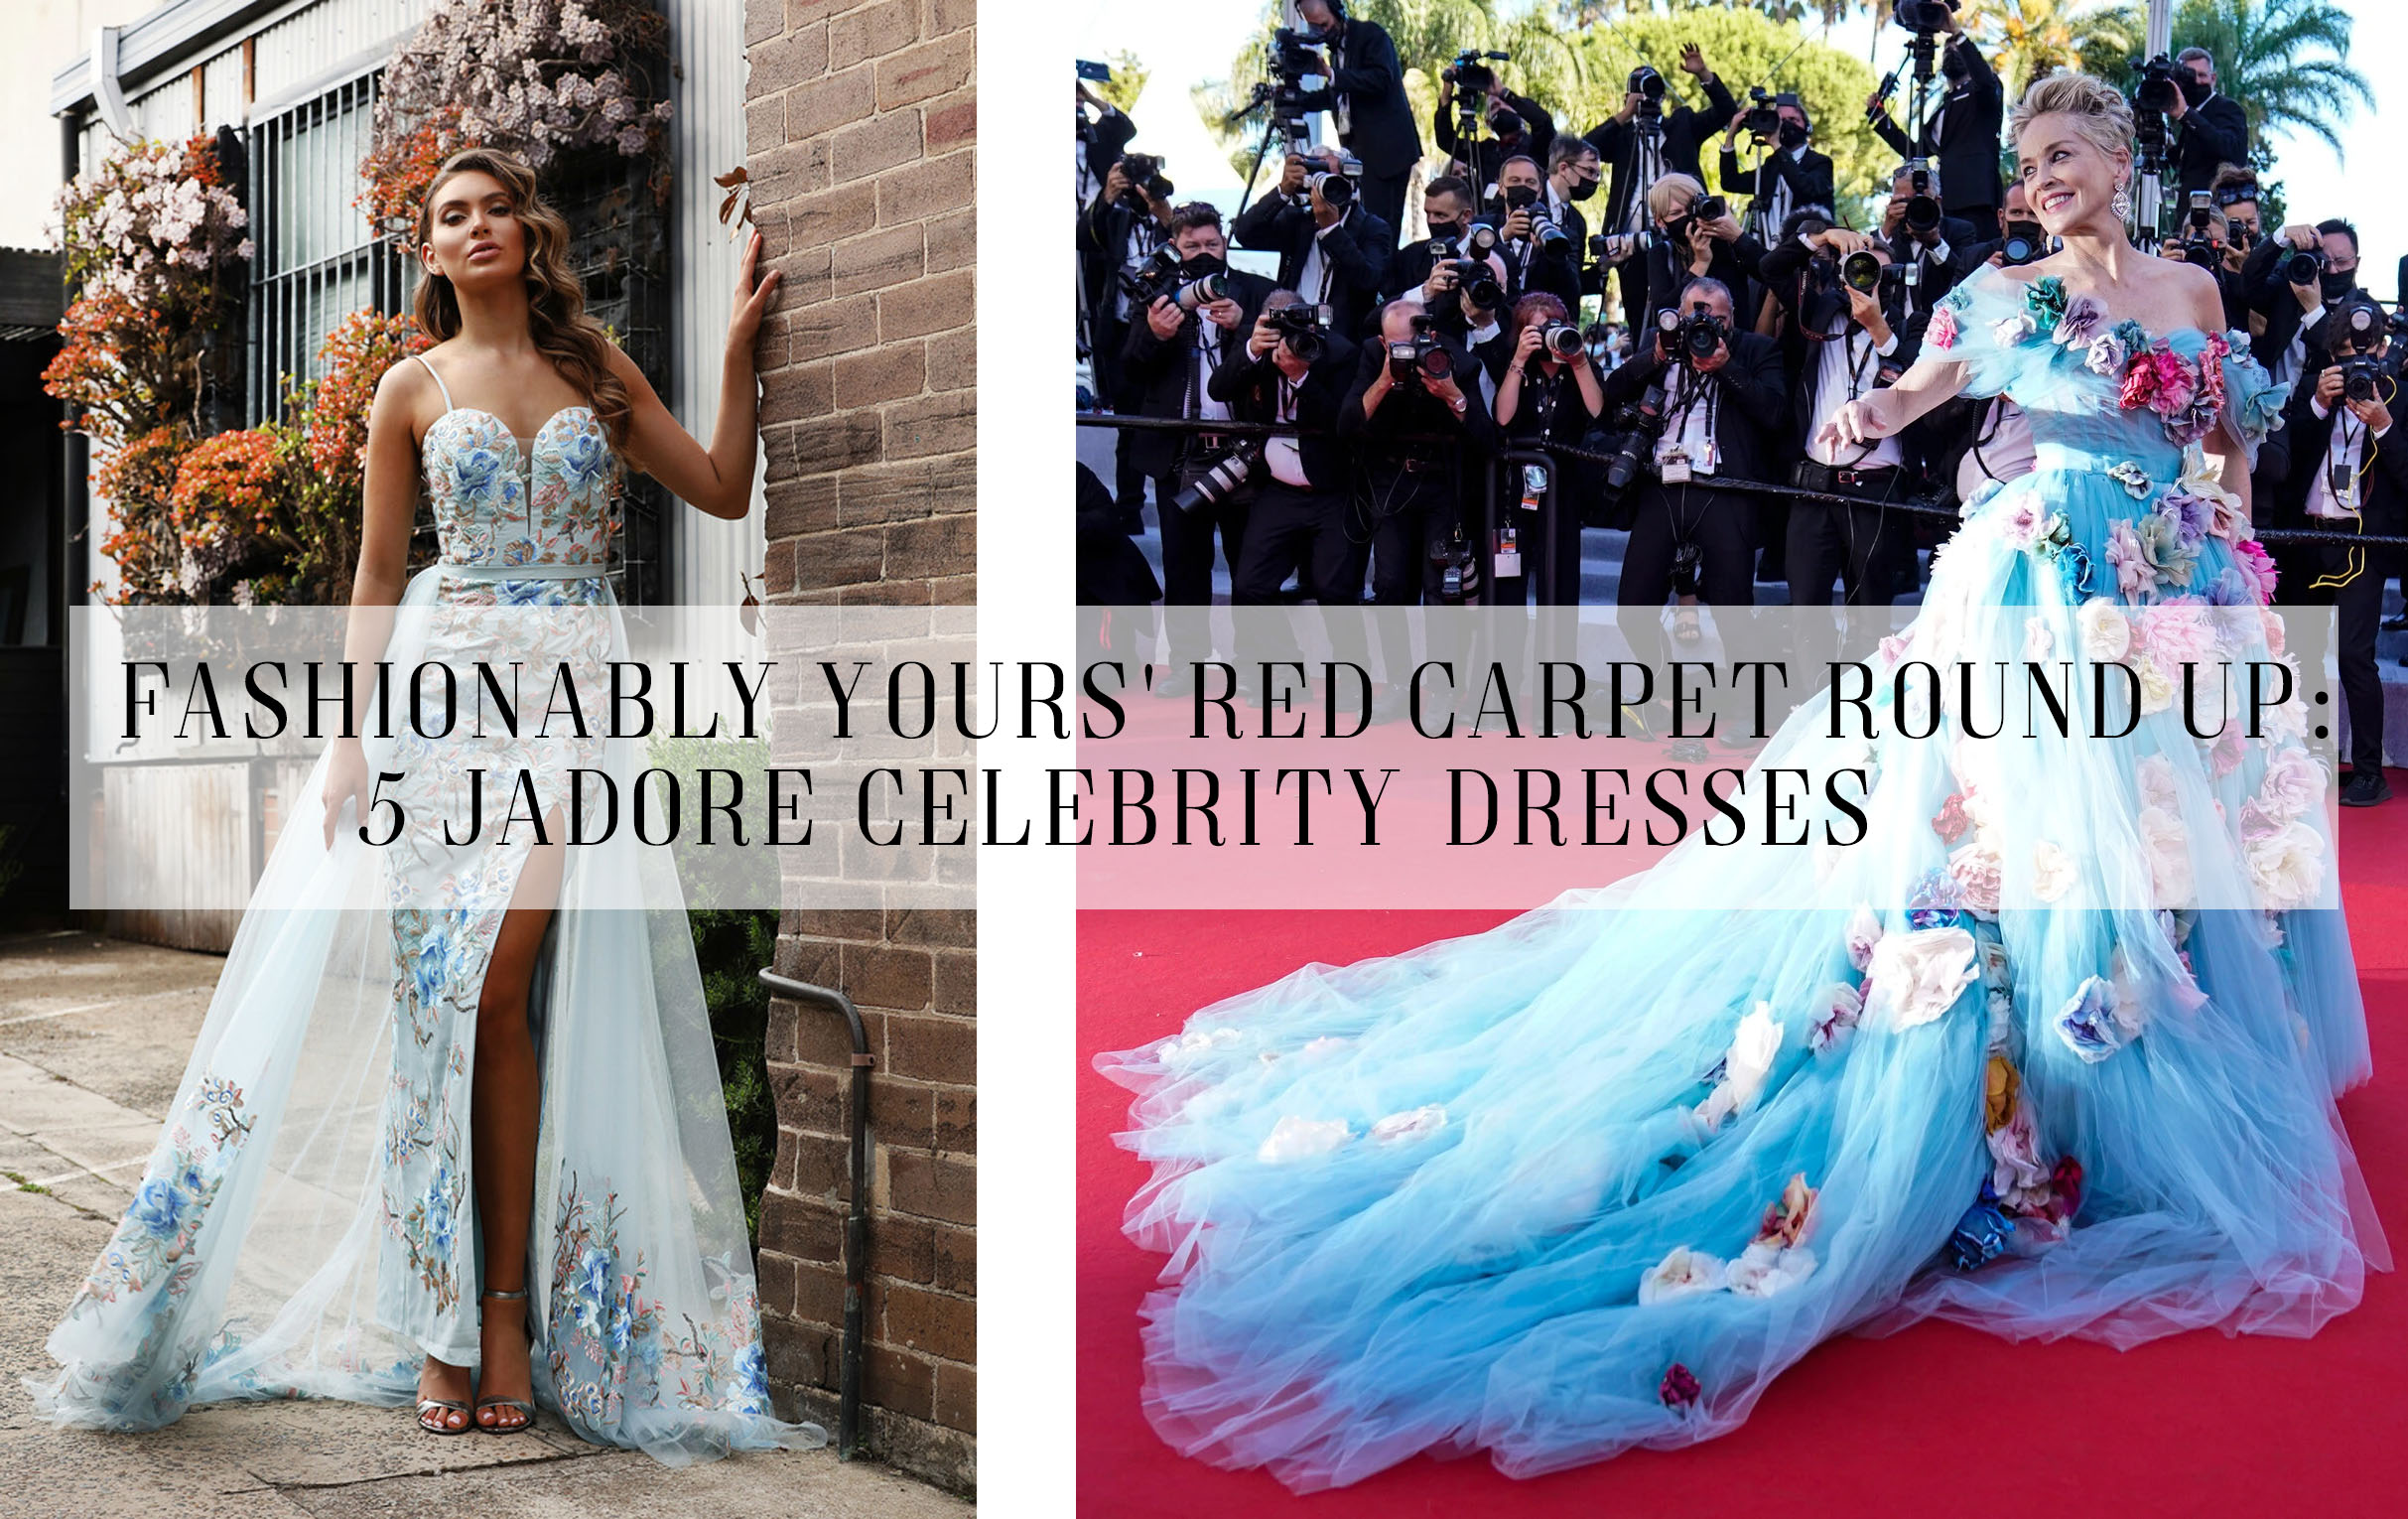 LOOK: 35 Stunning Celebrity Maternity Looks On the Red Carpet